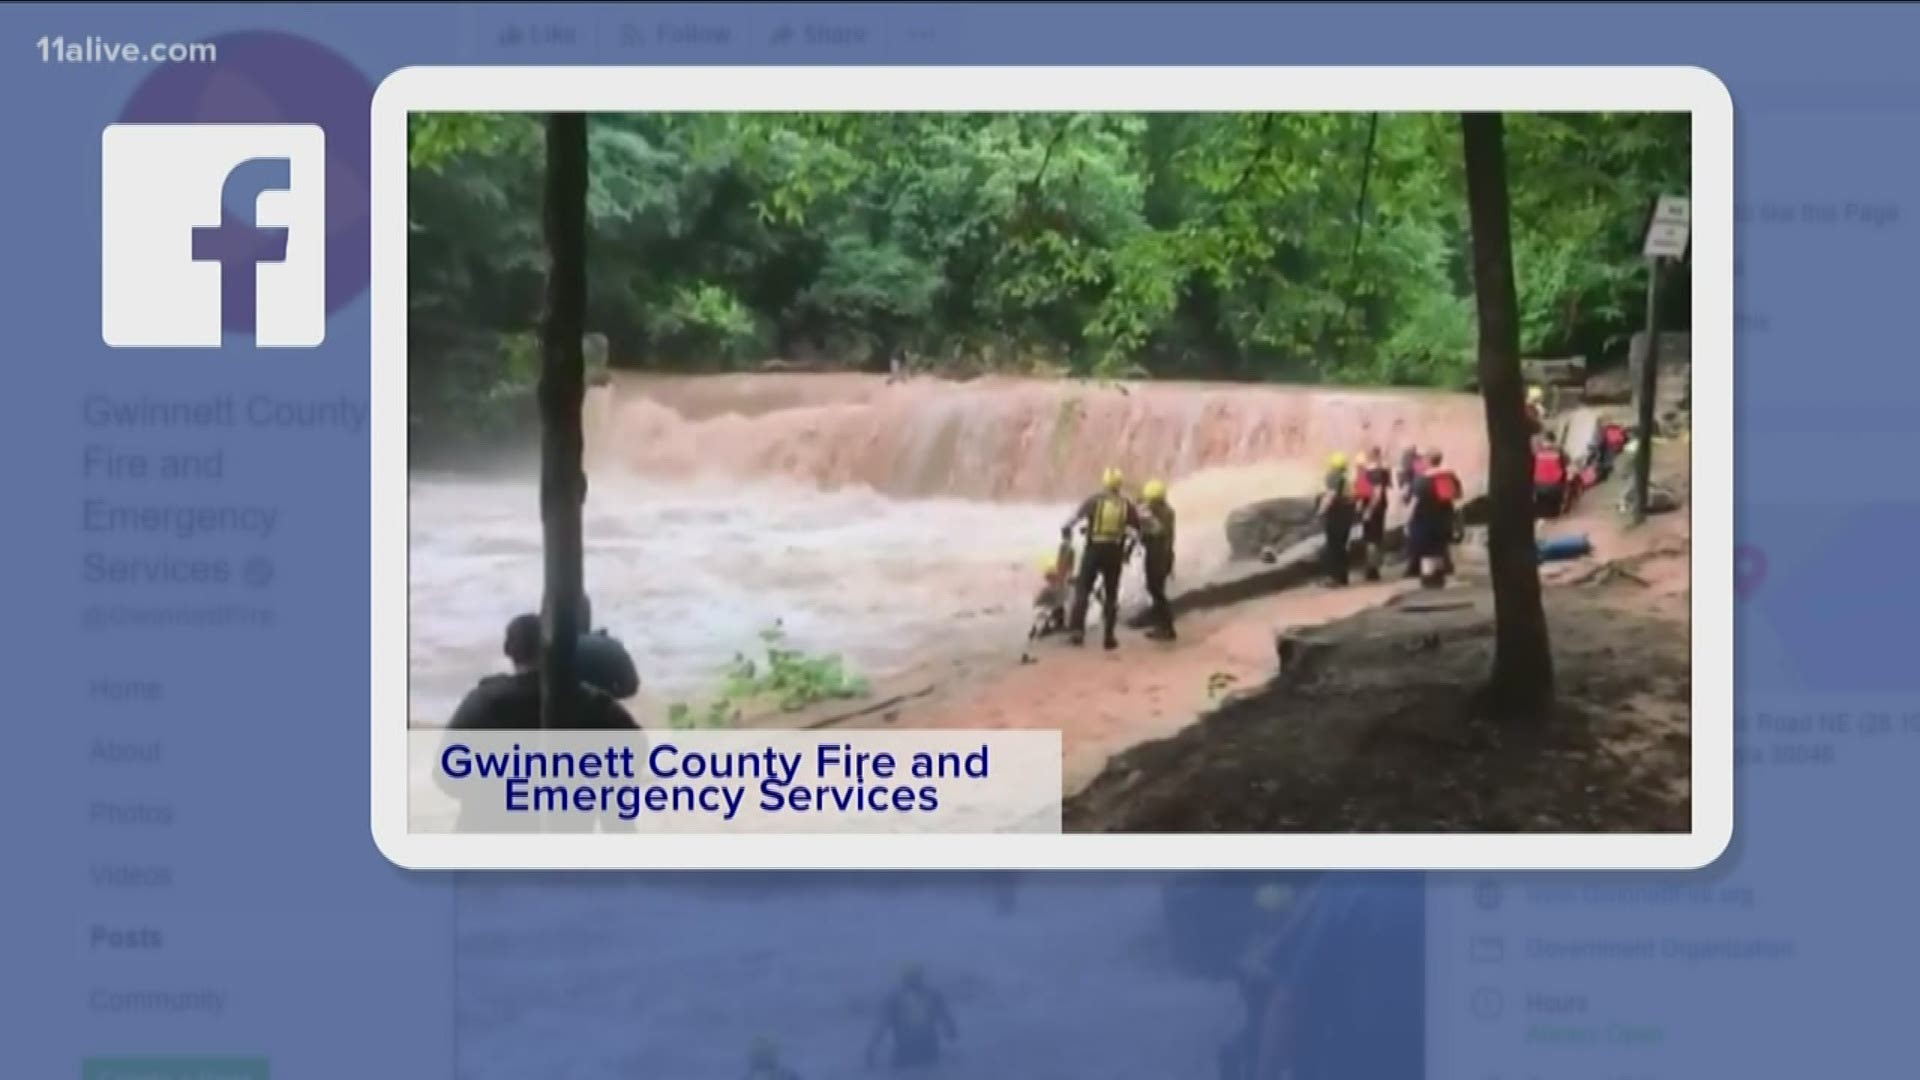 10 children were saved from dangerous rapids in Gwinnett County. It took nearly an hour to pull them to safety.